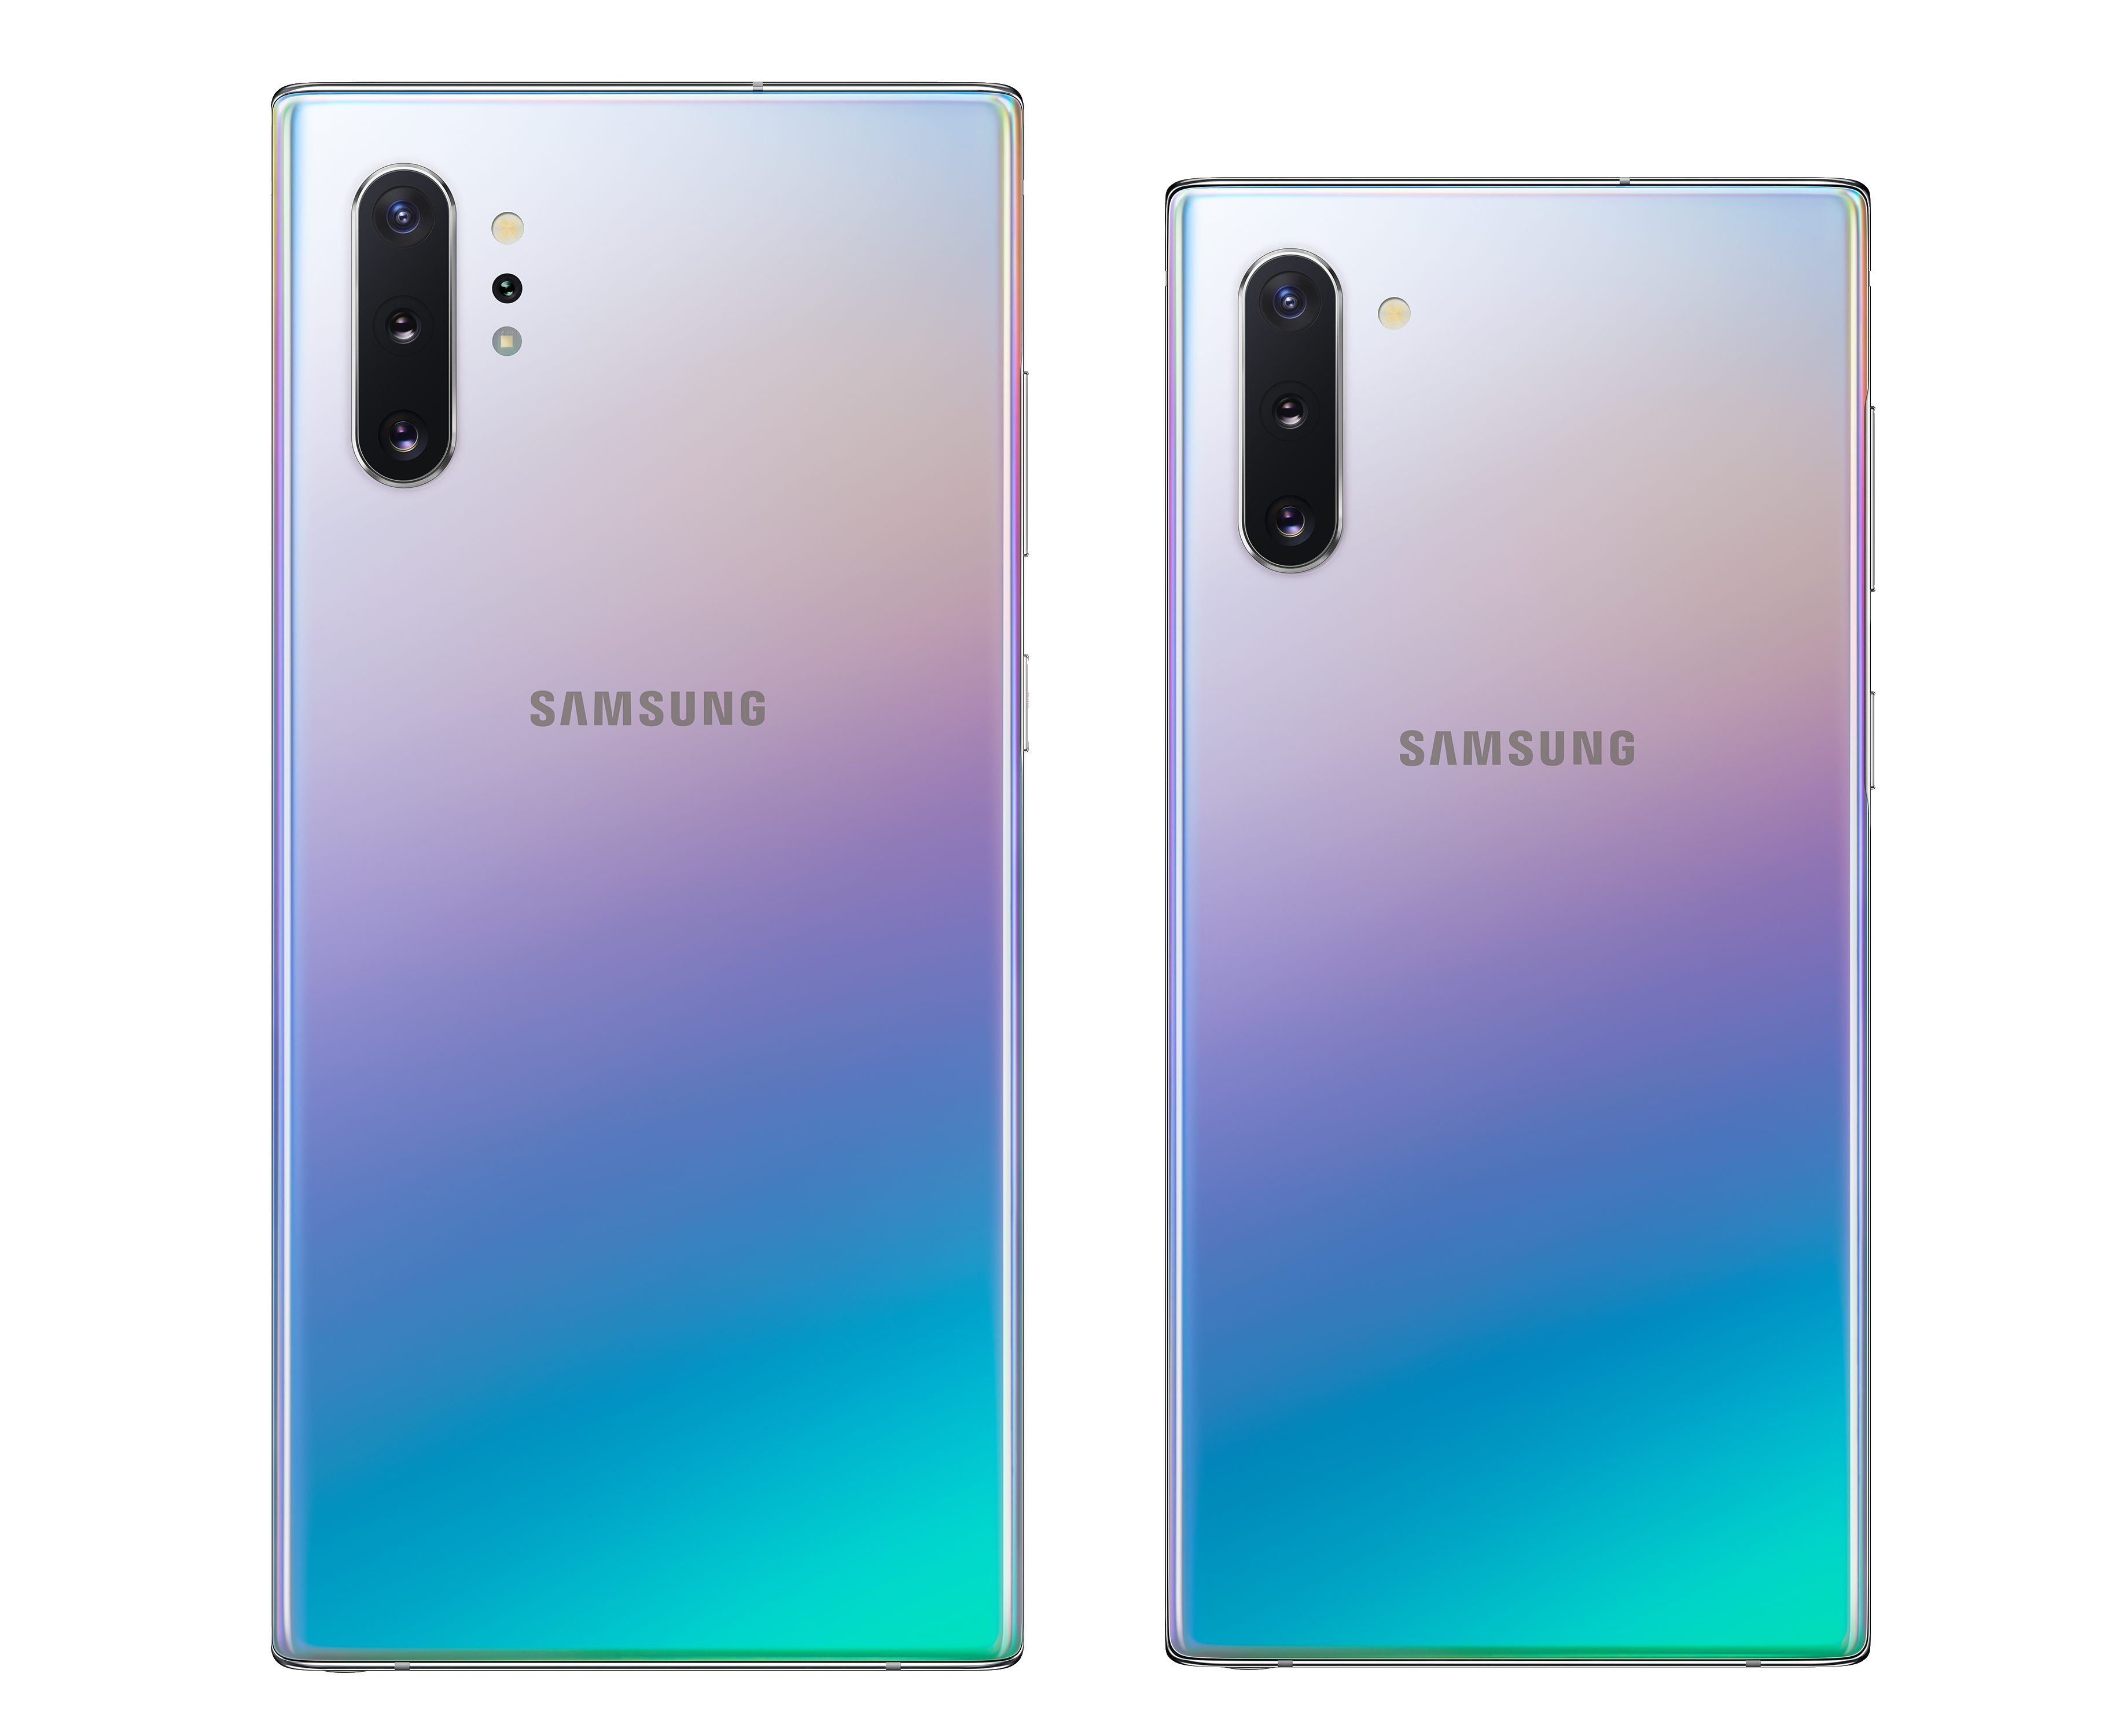 Galaxy Note 10+ vs. Galaxy Note 10: Which should you buy